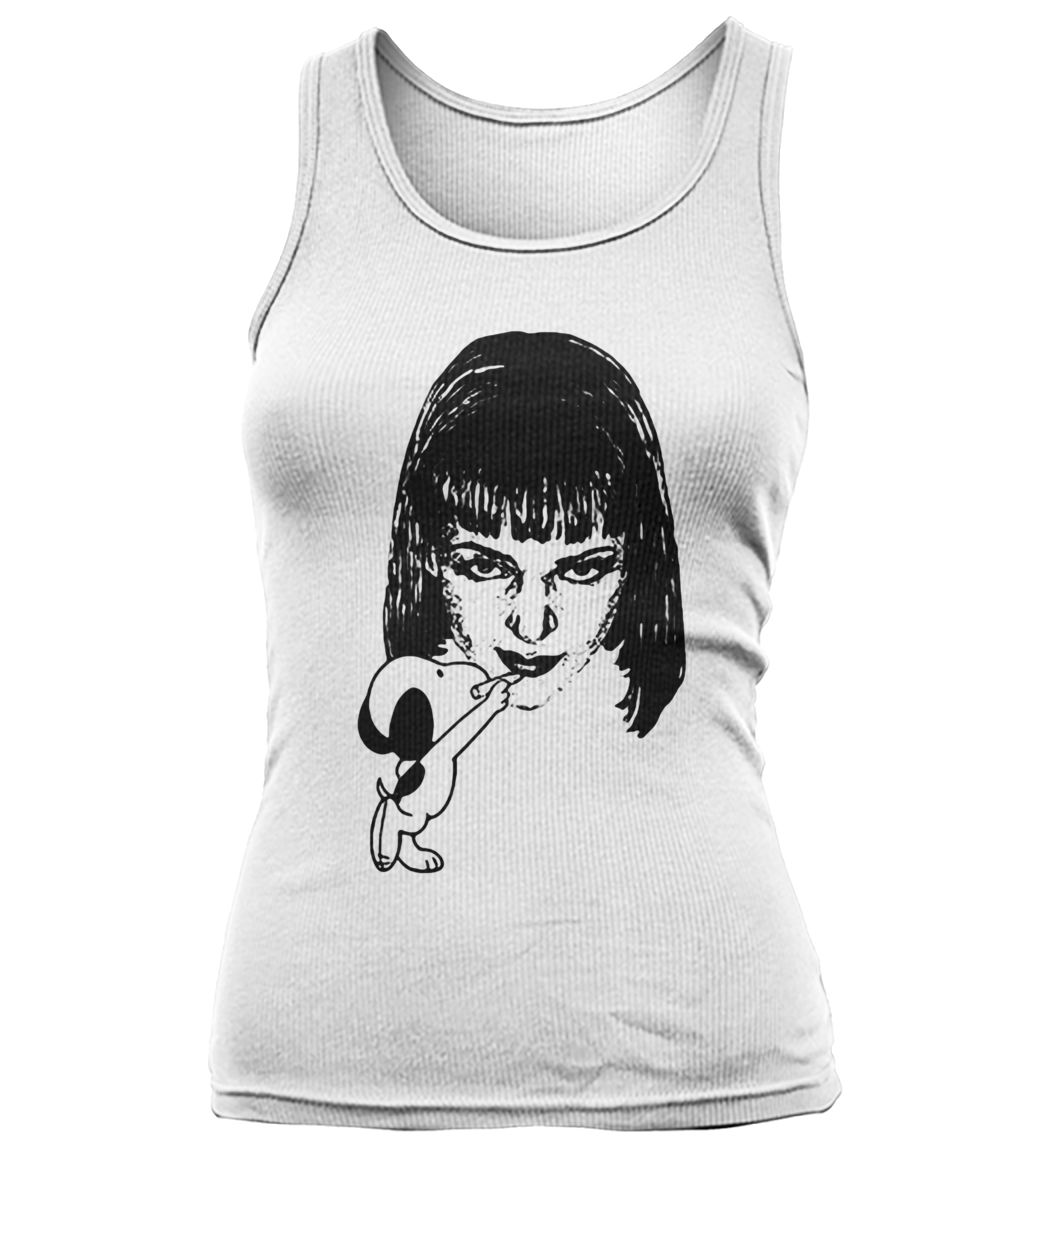 Snoopy drawing mia wallace pulp fiction women's tank top